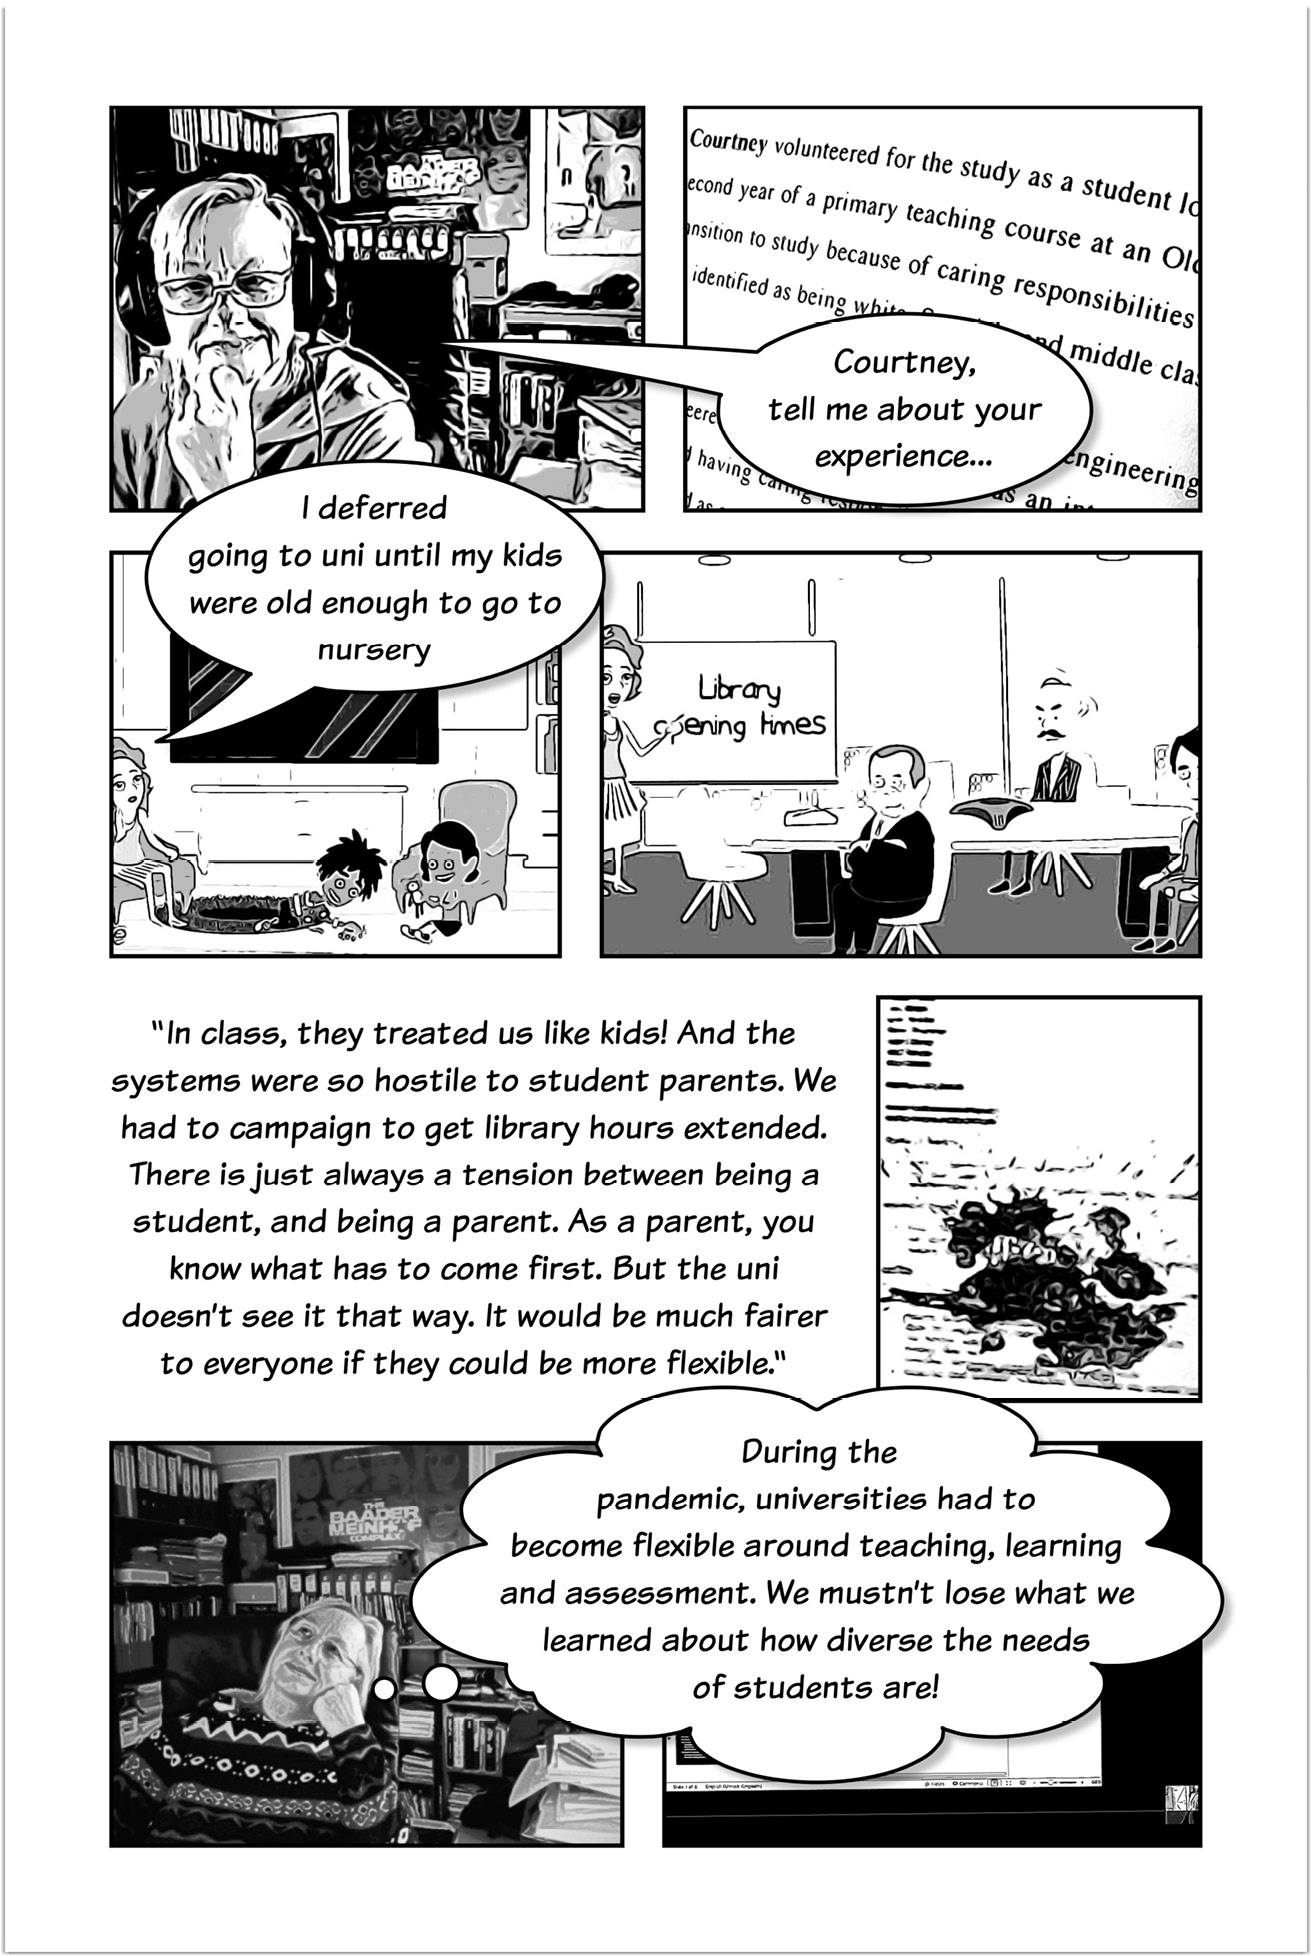 Four-panelled sequence of a comic strip, the first panel showing Trowlerís character with a speech bubble saying: Courtney, tell me about your experience. The next panel shows Courtney with a speech bubble that reads: I deferred going to uni until my kids were old enough to go to nursery. The last panel of the sequence shows Courtney speaking in front of other persons seated near a projector screen with a text that reads: Library opening times. Another three-panelled sequence introduced by text that reads: In class, they treated us like kids! And the systems were so hostile to student parents. We had to campaign to get library hours extended. There is just always a tension between being a student, and being a parent. As a parent, you know what has to come first. But the uni doesnít see it that way. It would be much fairer to everyone if they could be more flexible. Then a panel focused on Trowlerís character with a thought bubble that reads: During the pandemic, universities had to become flexible around teaching, learning and assessment. We mustnít lose what we learned about how diverse the needs of students are!